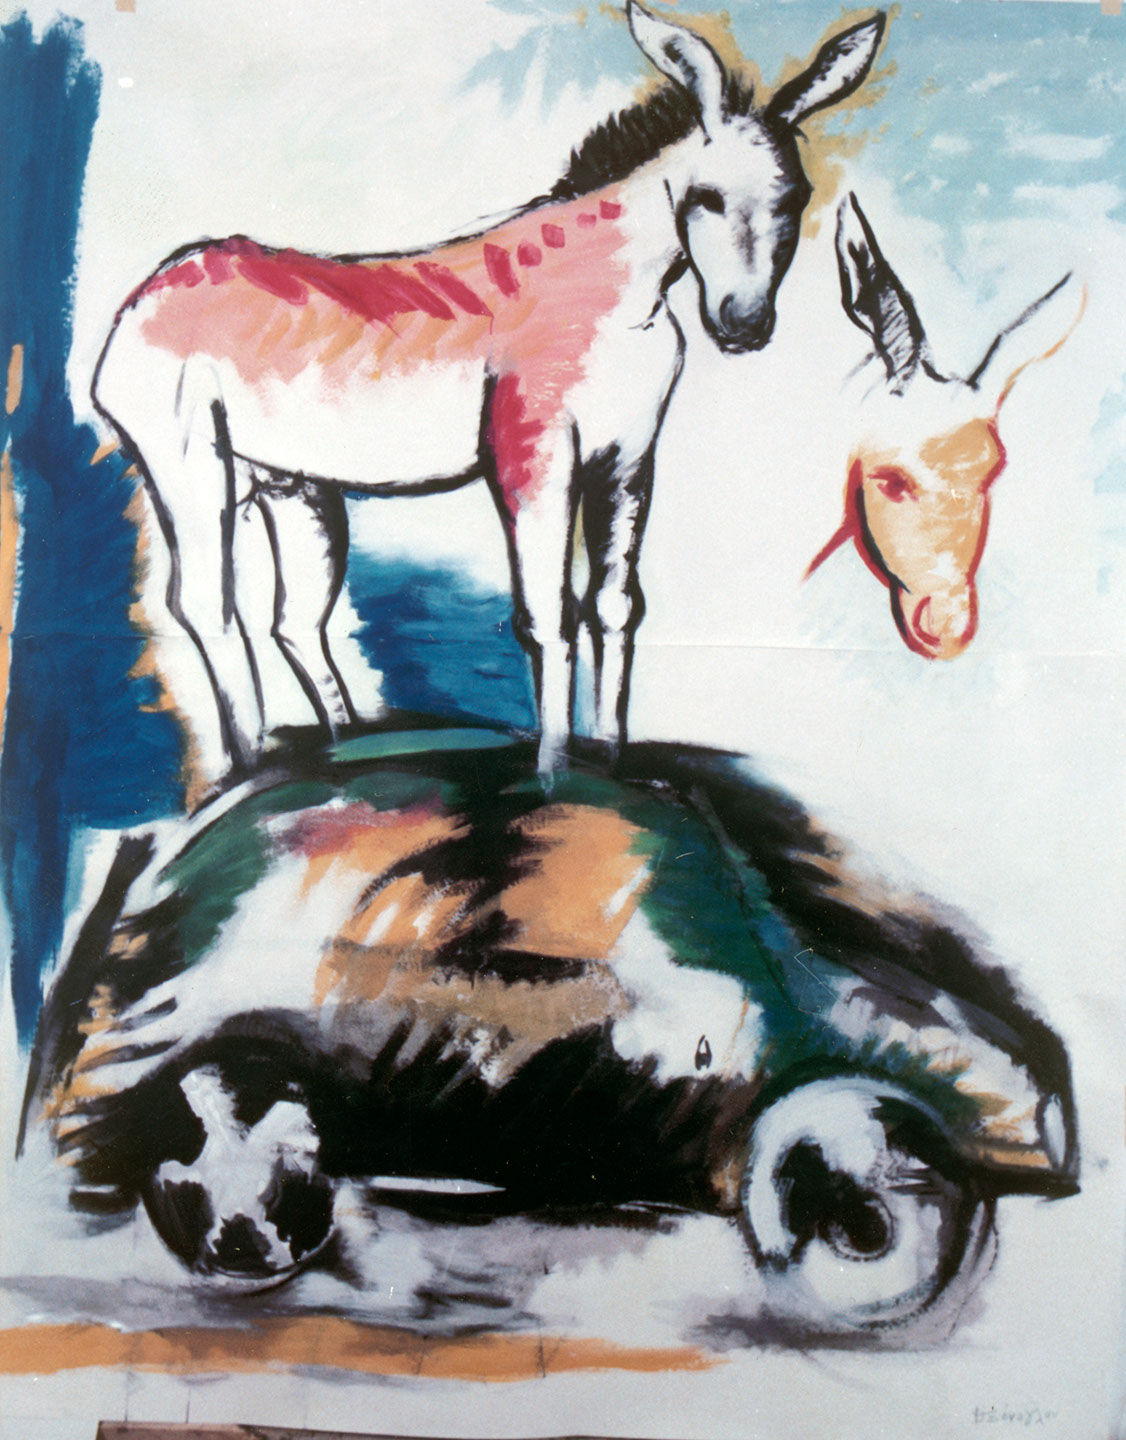 Title: SOSTIM
Materials: Acrylic on paper
Size: 268x200 cm
Year: 1986